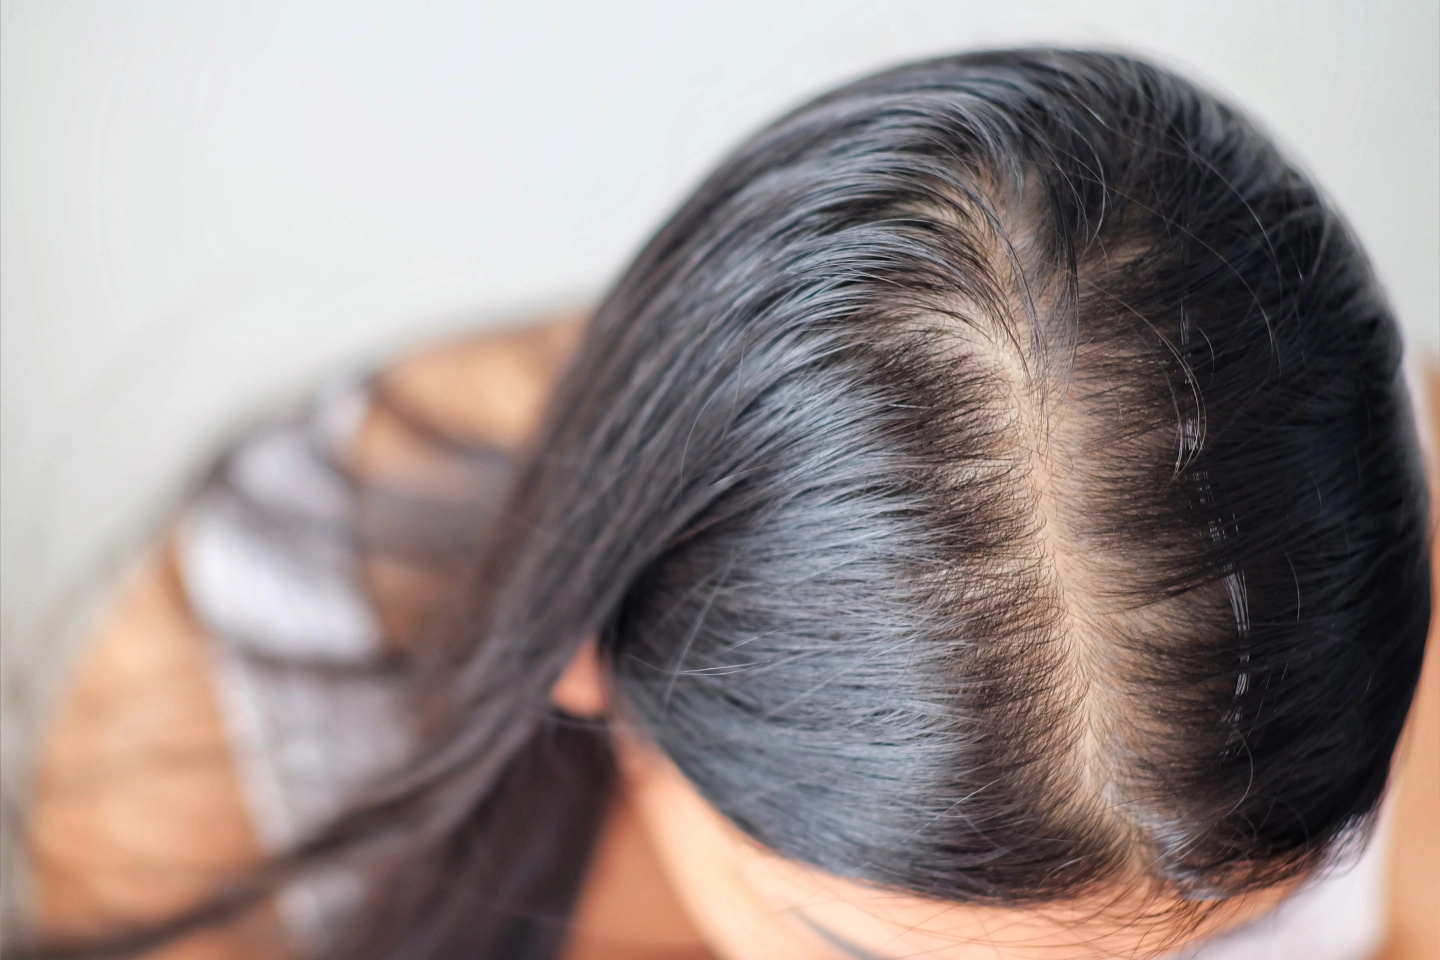 Get Hair Loss Restoration at Lily Aesthetics in Parker, CO